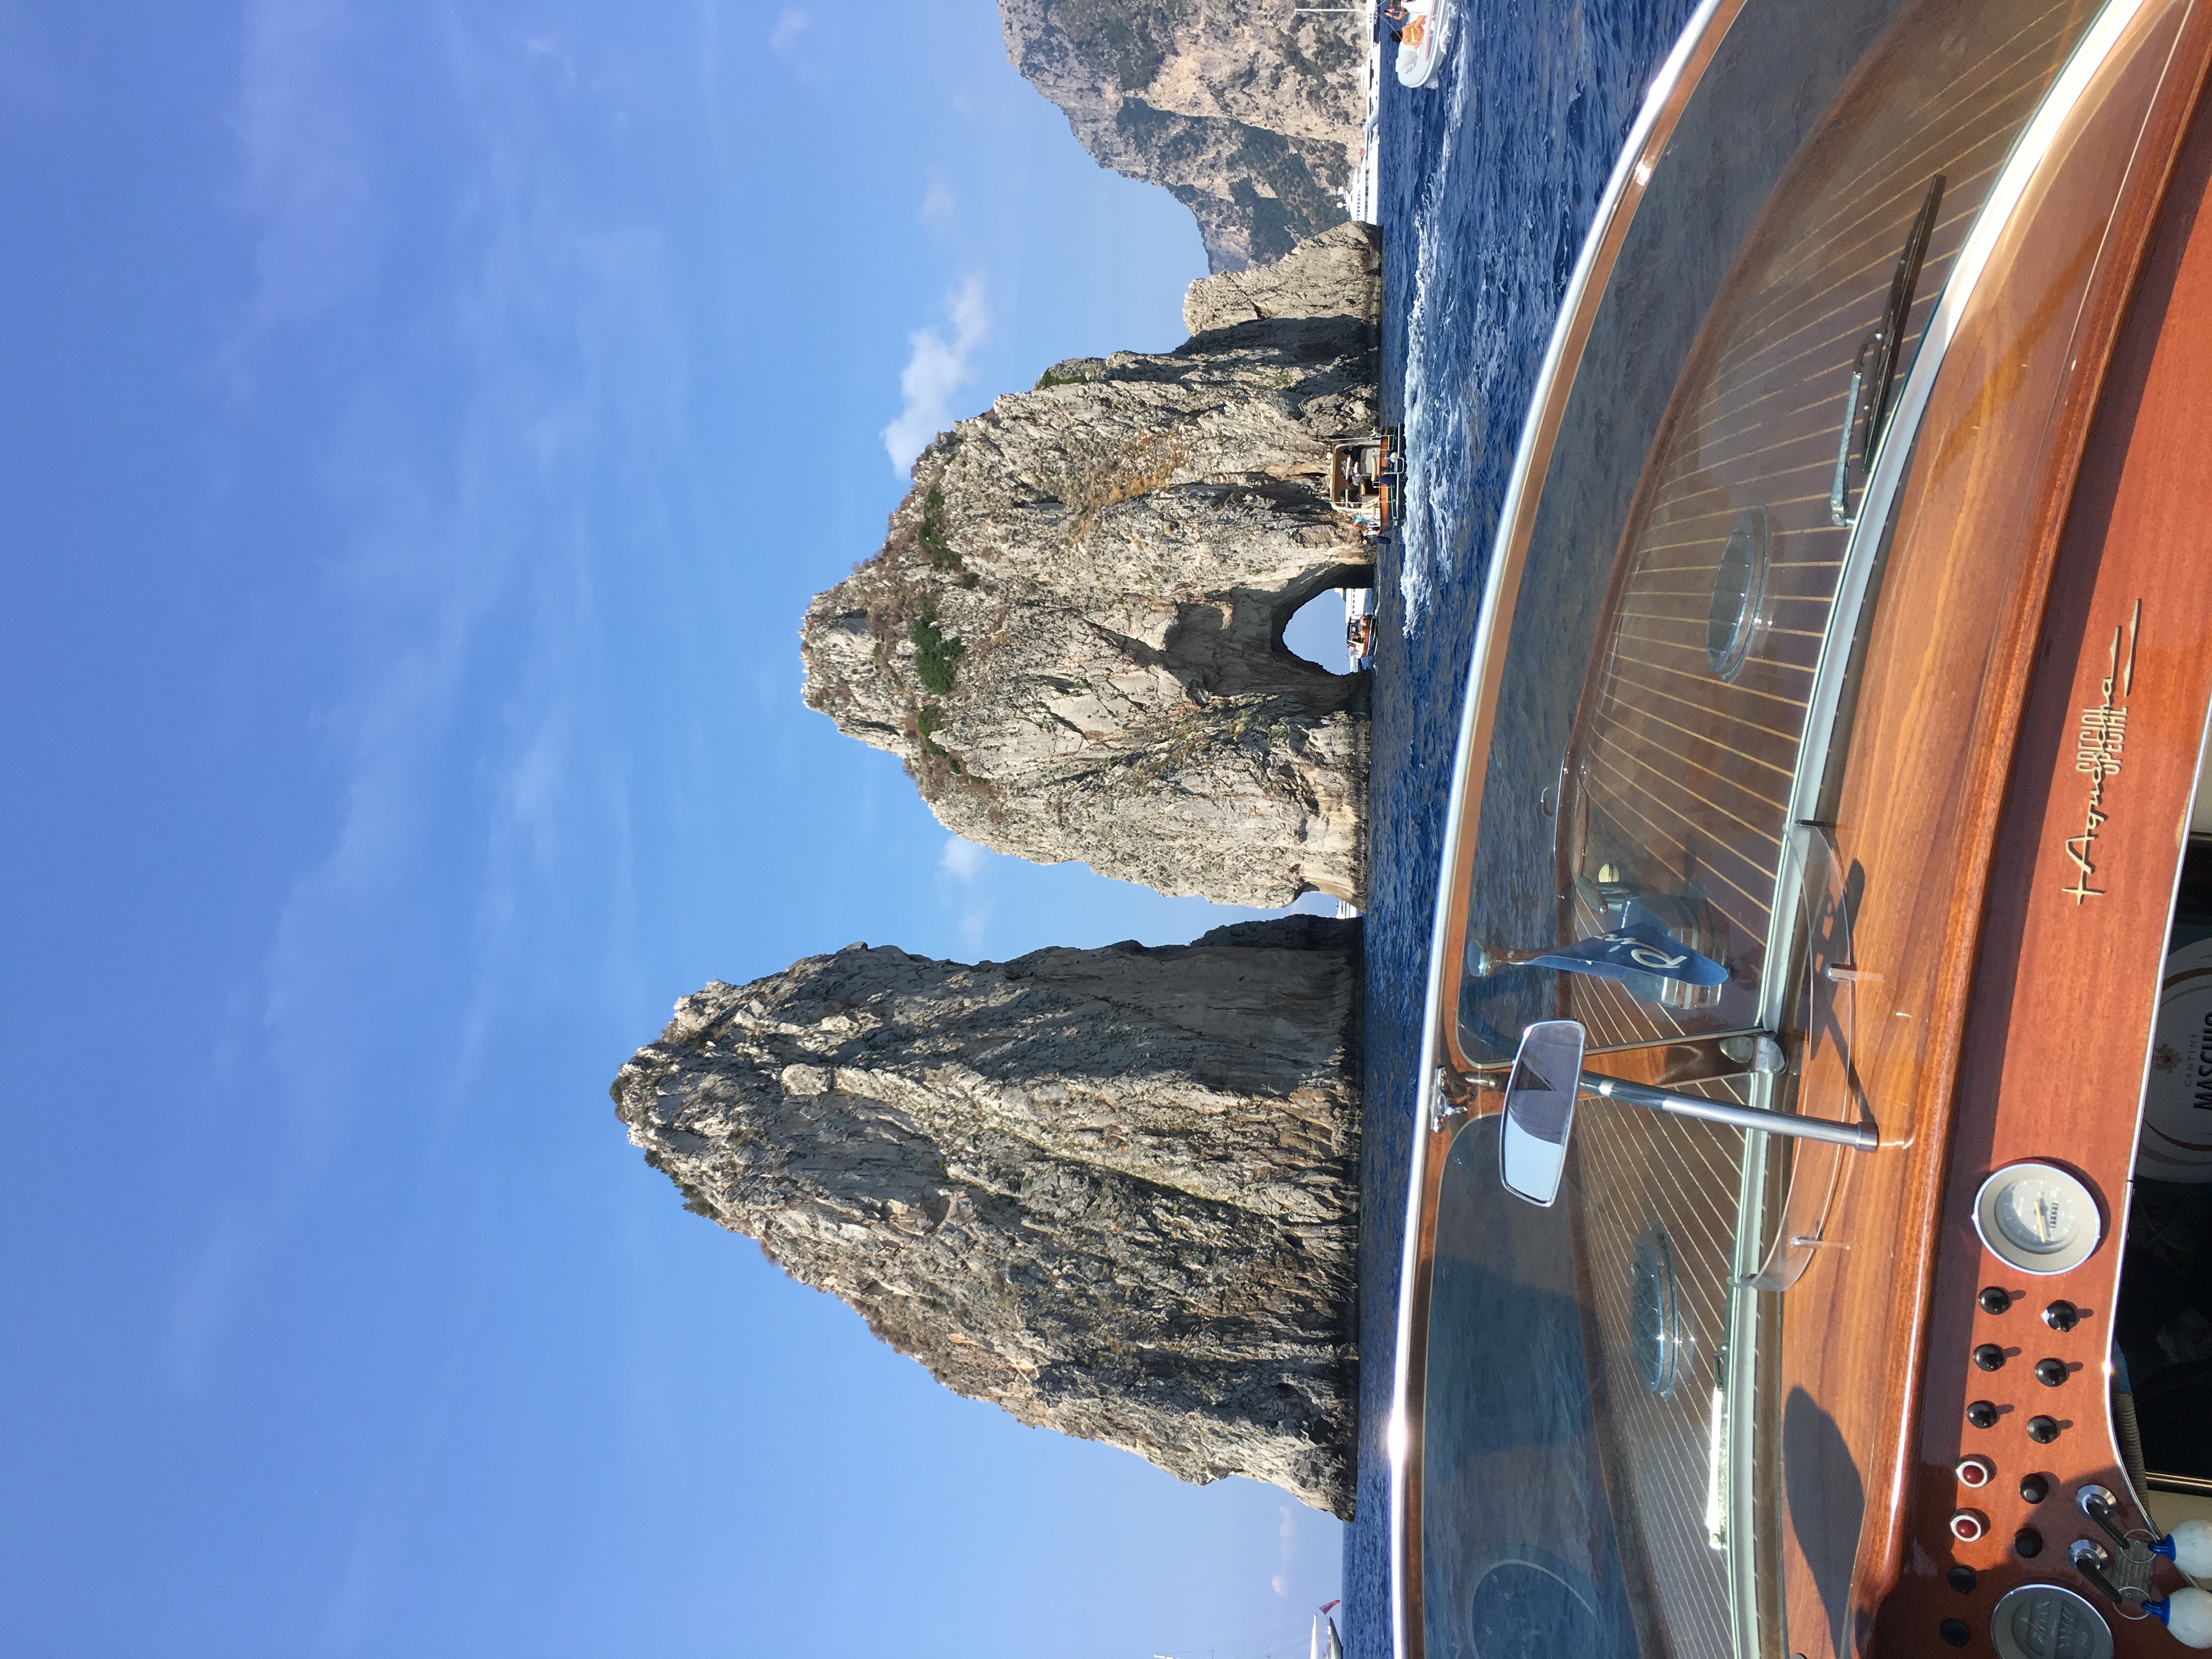 Riva Aquarama Special in Capri, Italy in front of the famous Faraglioni. Photograph by The Traveling Gentleman @travelinggentleman 